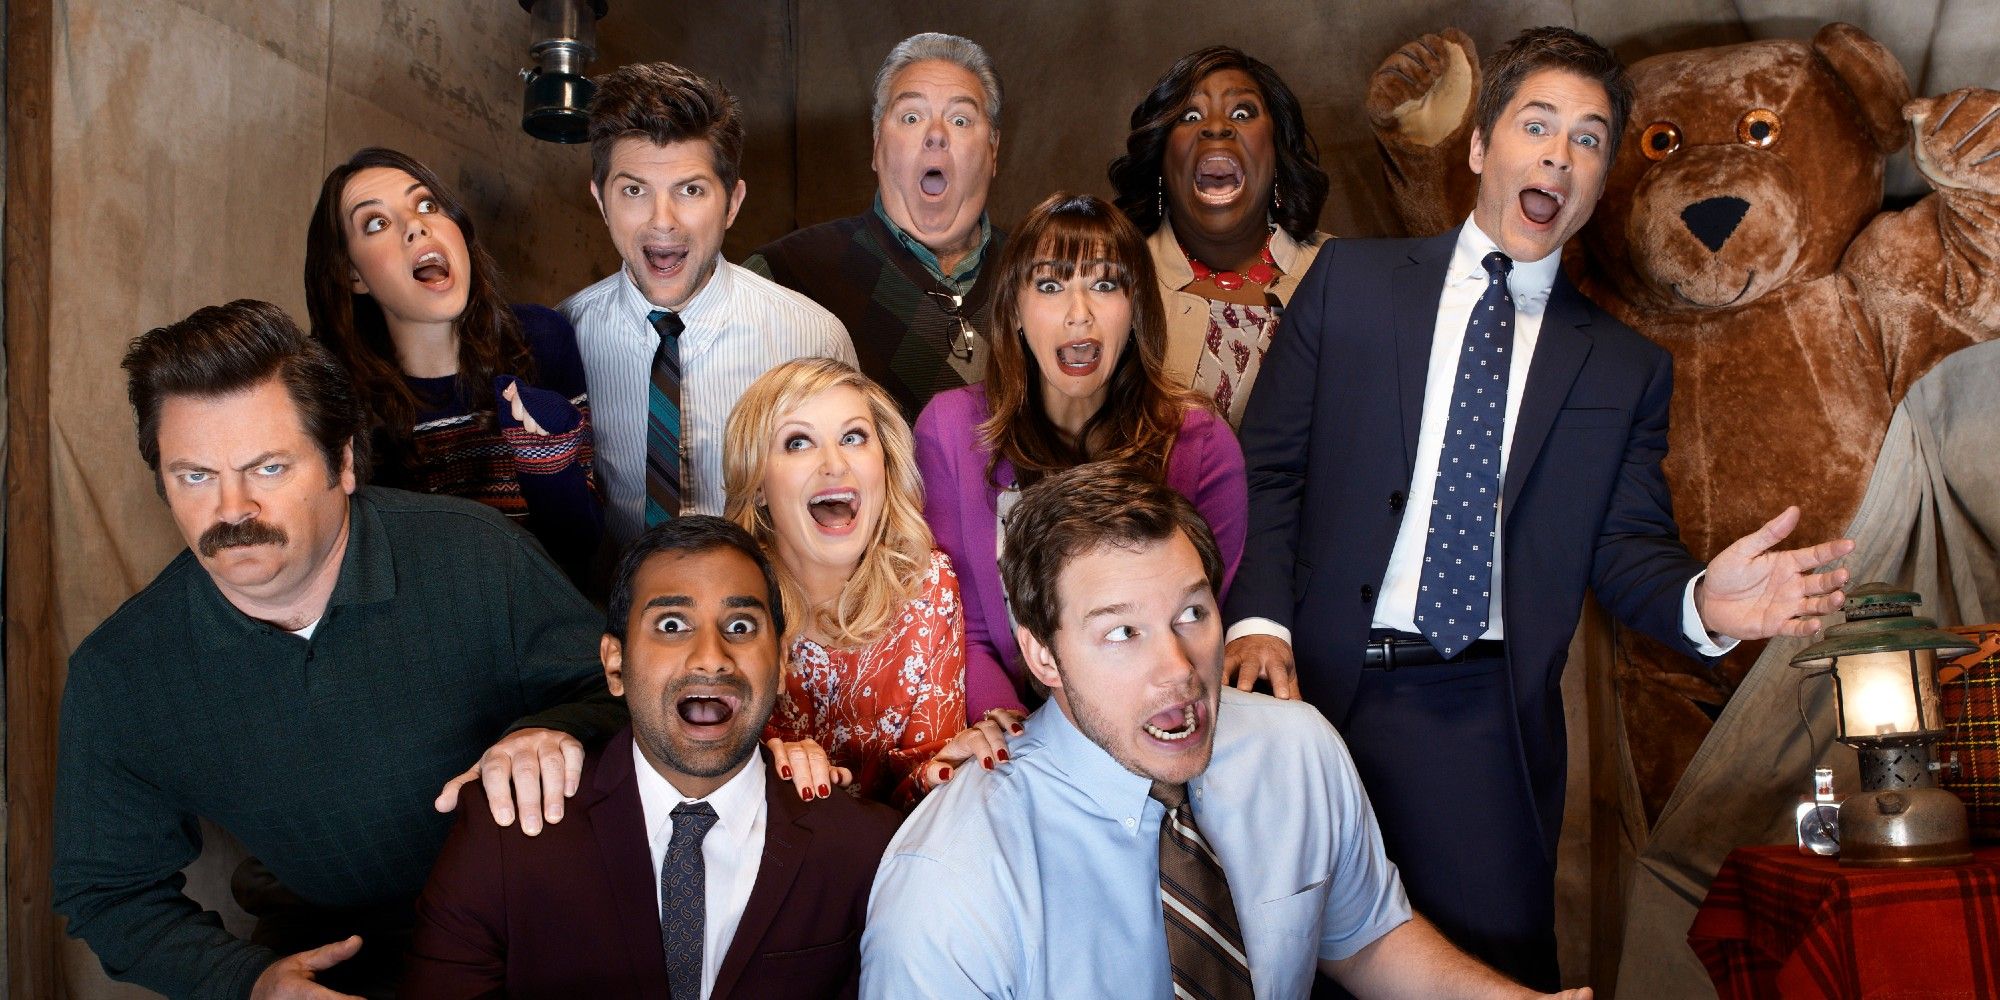 Parks and Recreation cast screaming together